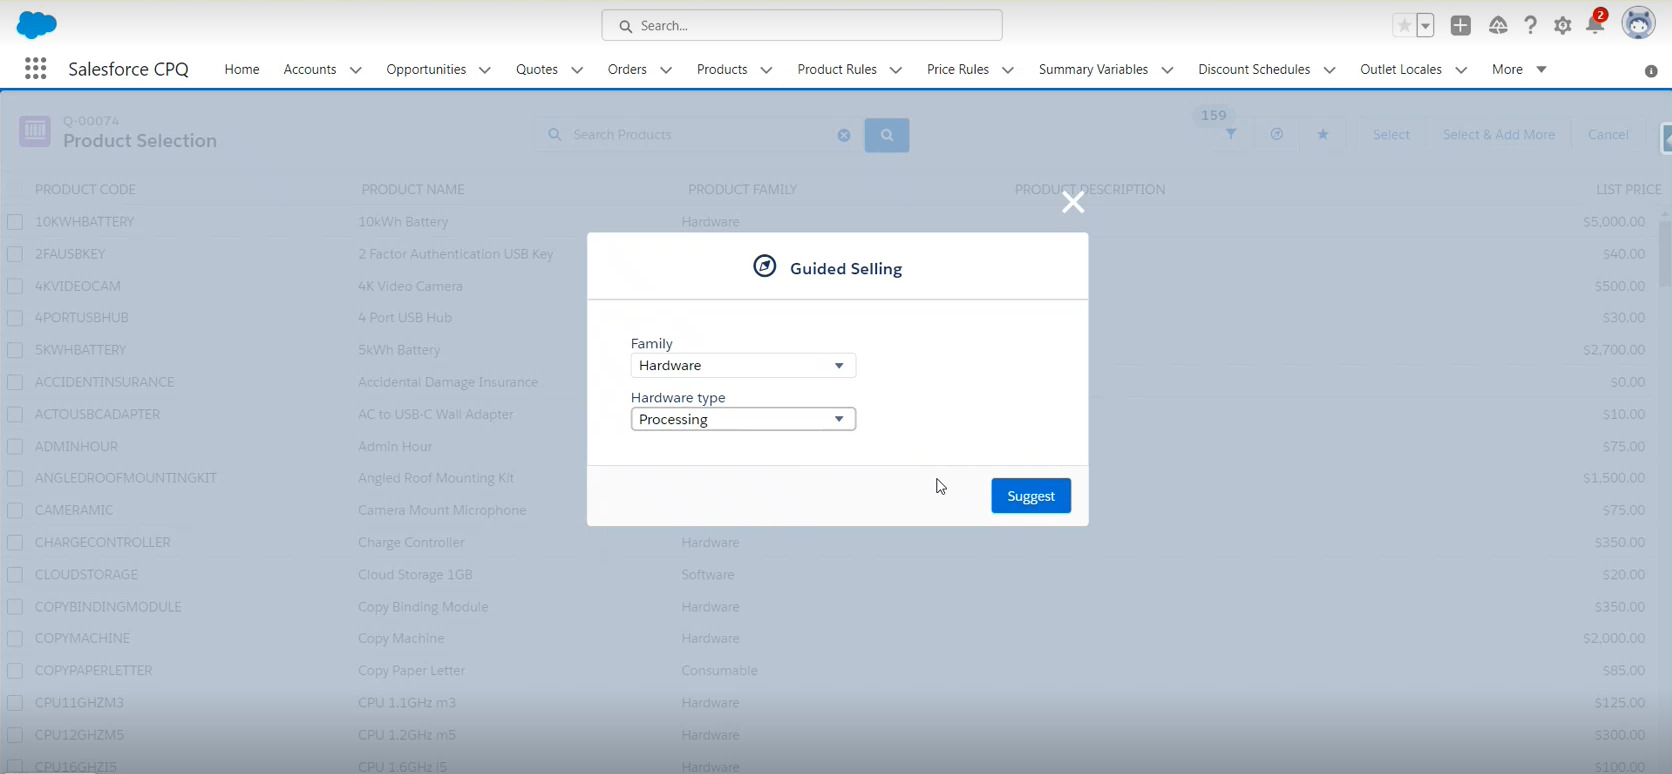 Example of a Guided Selling template in Salesforce CPQ